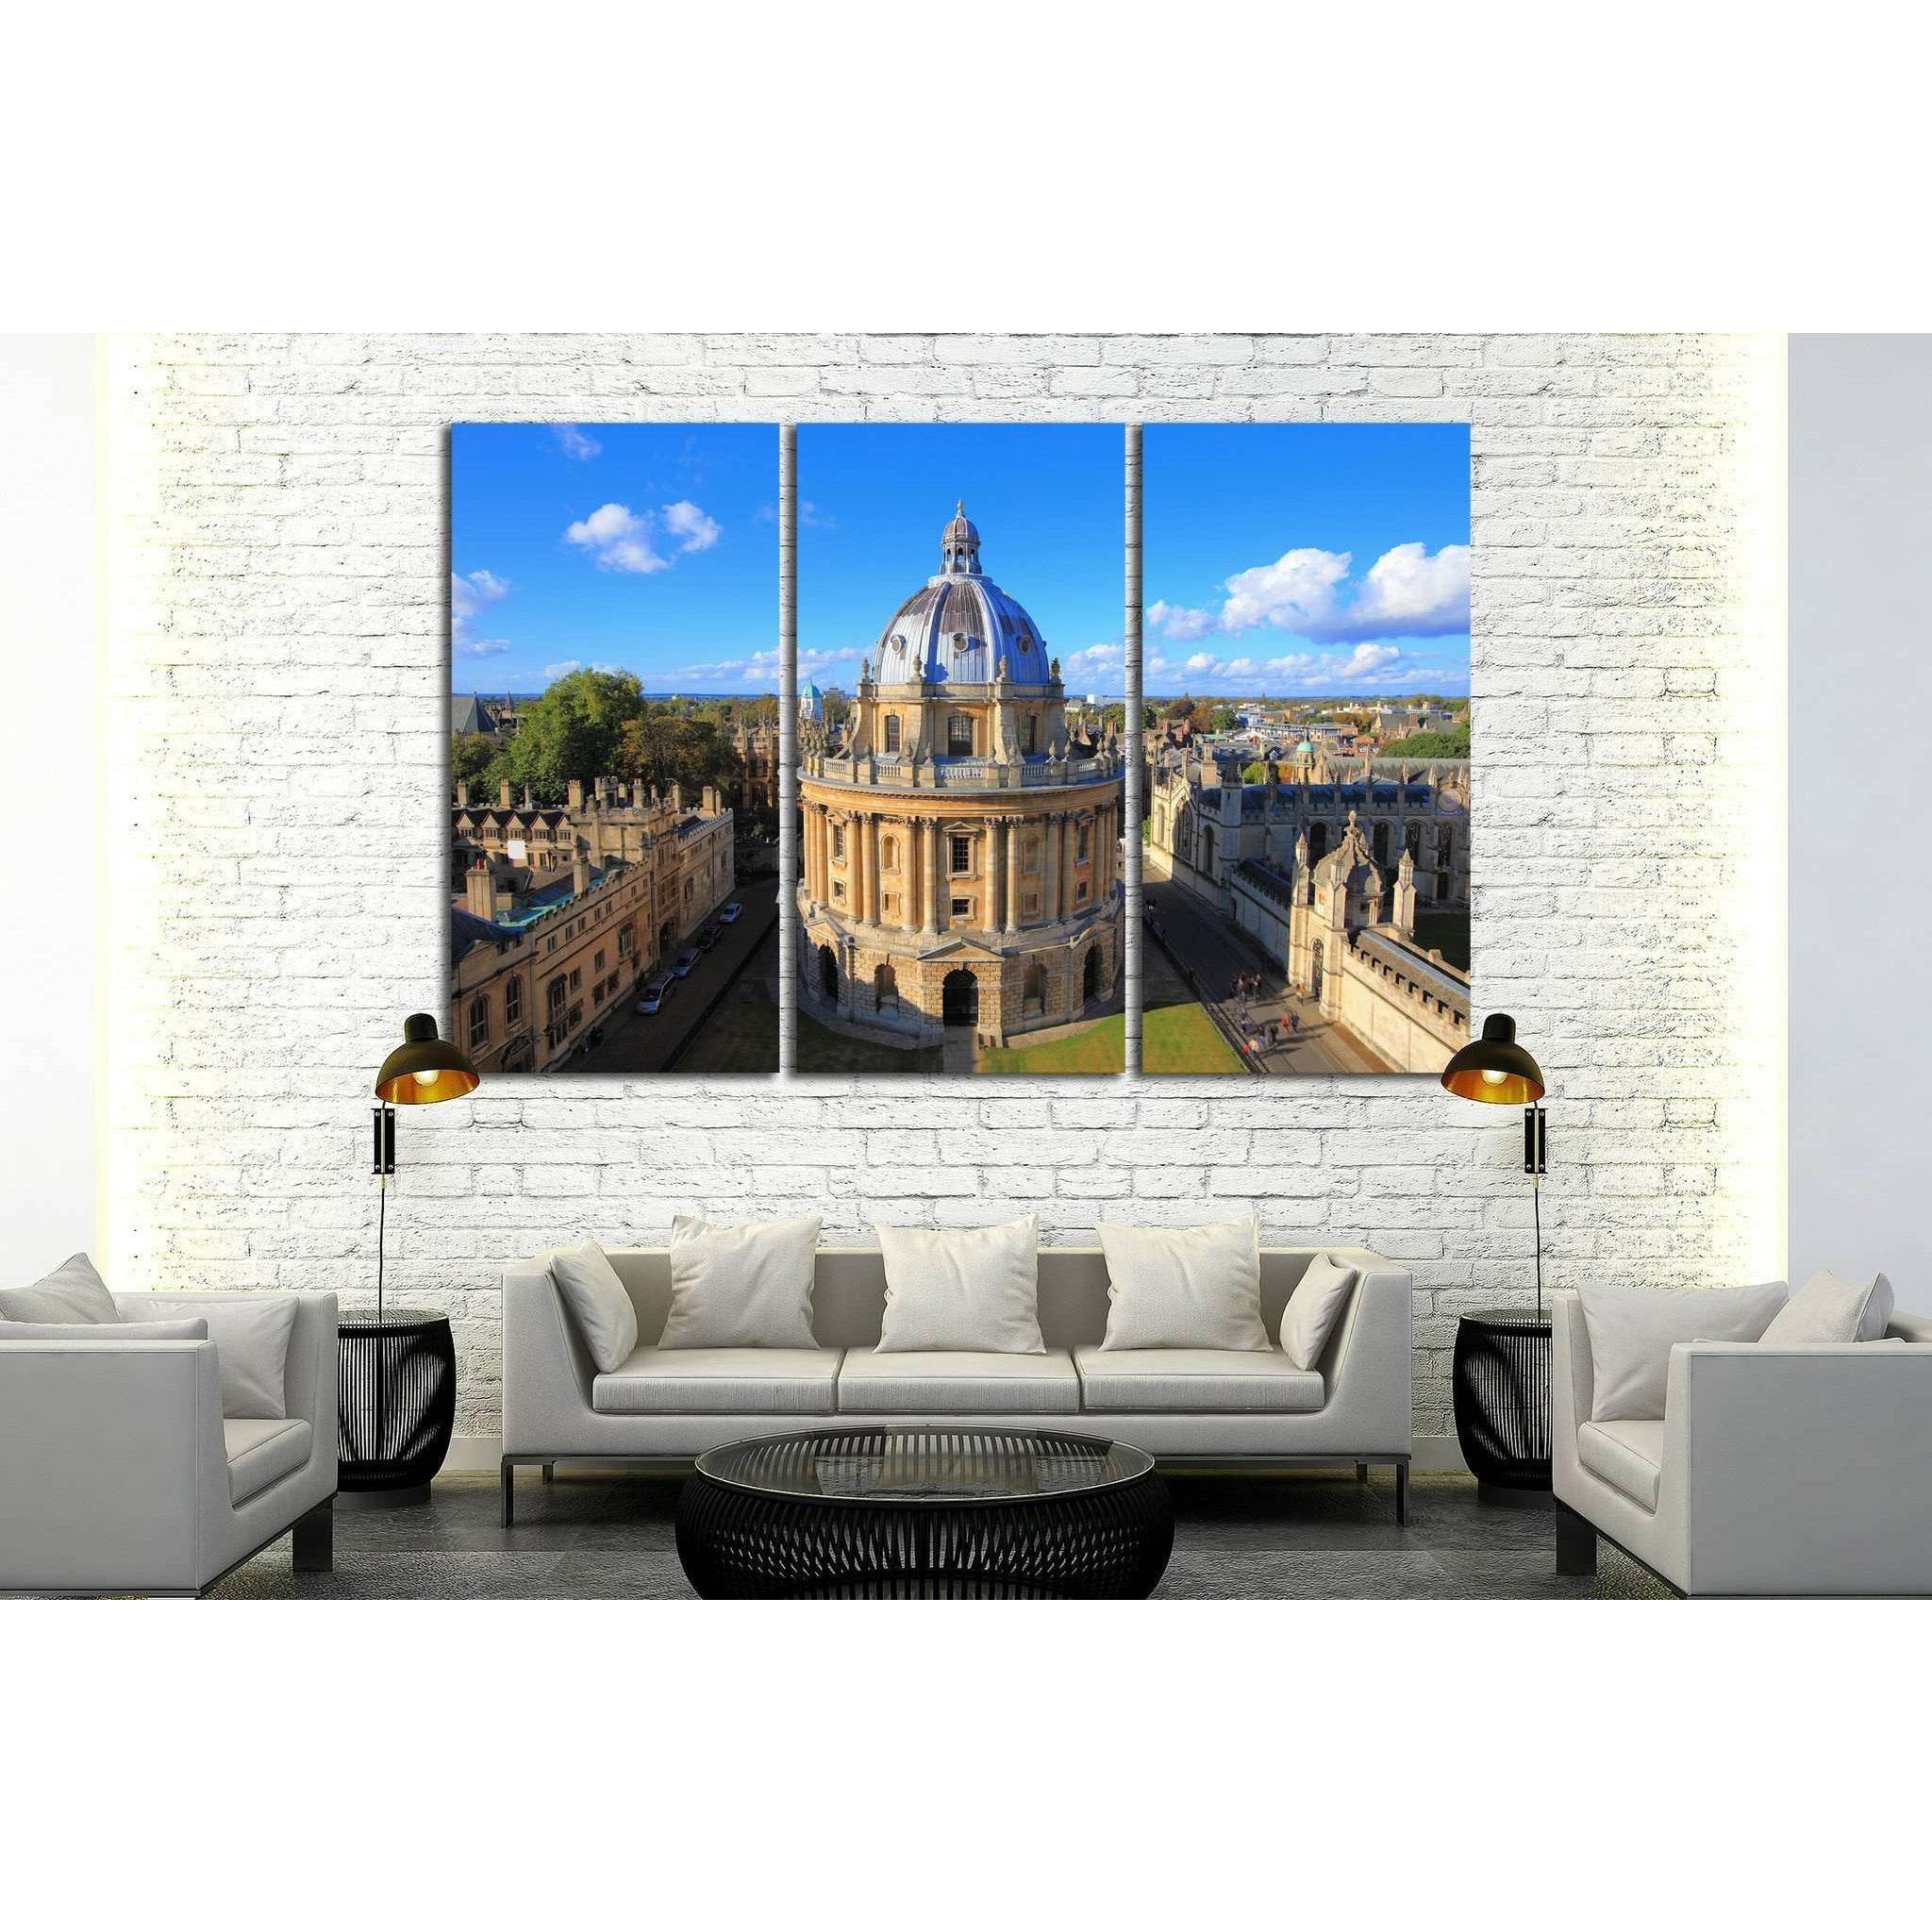 The Oxford University №590 Ready to Hang Canvas Print